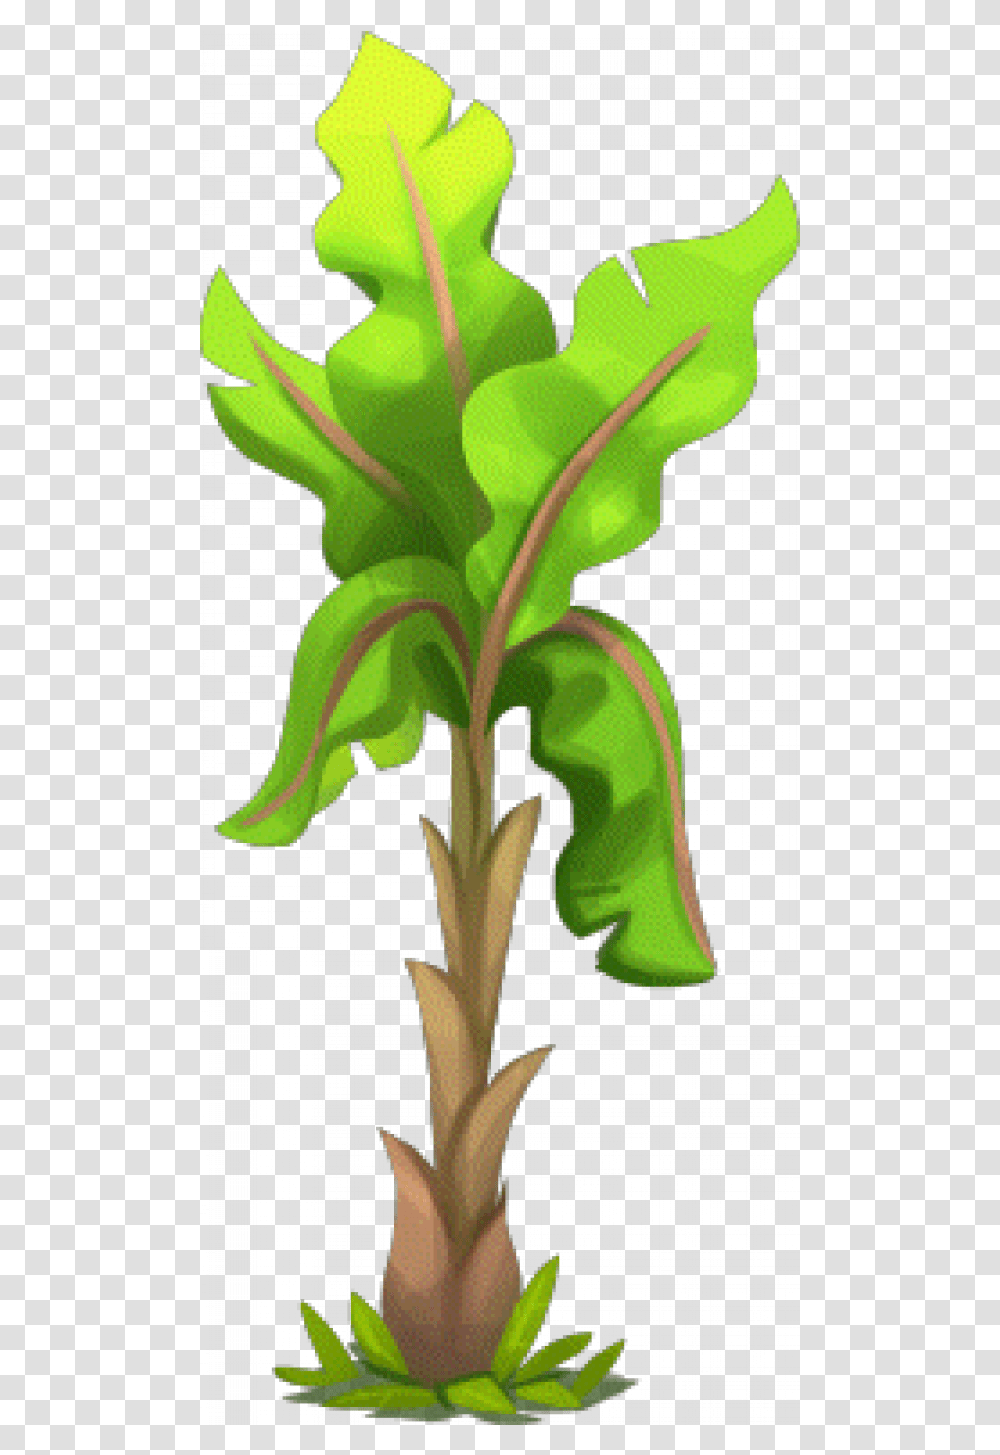 Banana Tree Images Banana Tree Hd, Plant, Flower, Blossom, Acanthaceae Transparent Png